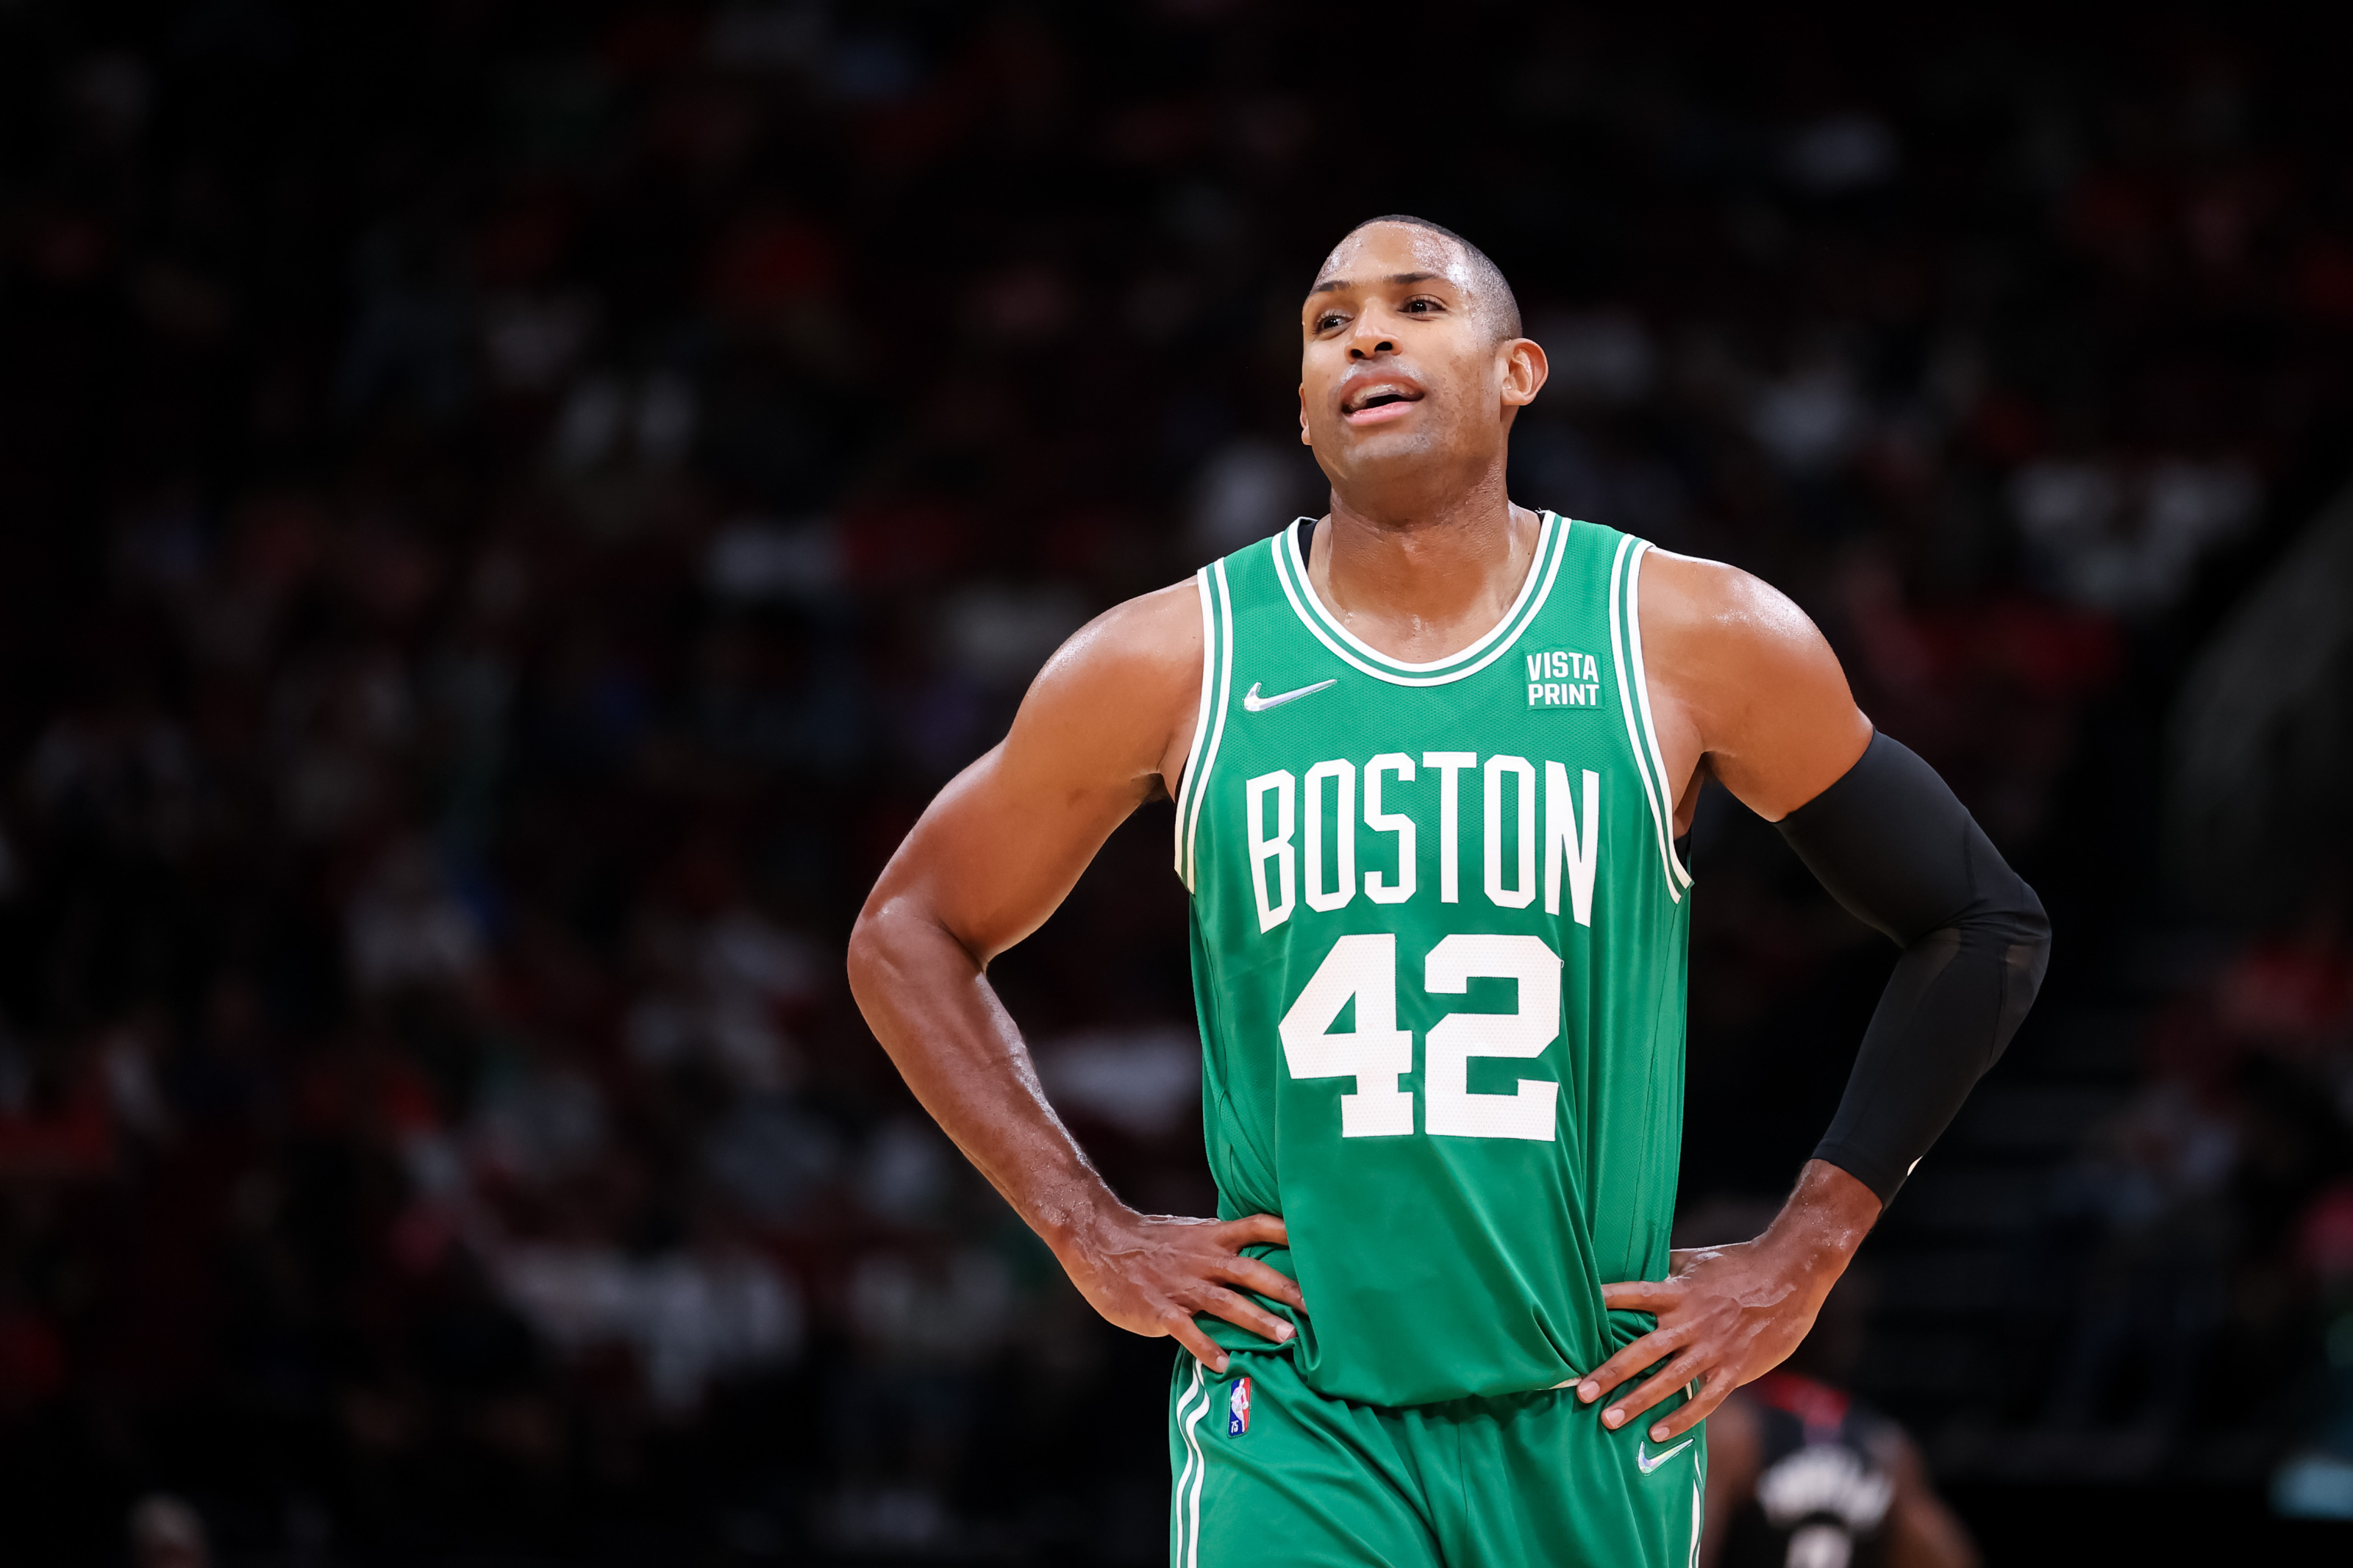 Al Horford is set to play in his first NBA Finals. Photo: Carmen Mandato/Getty Images